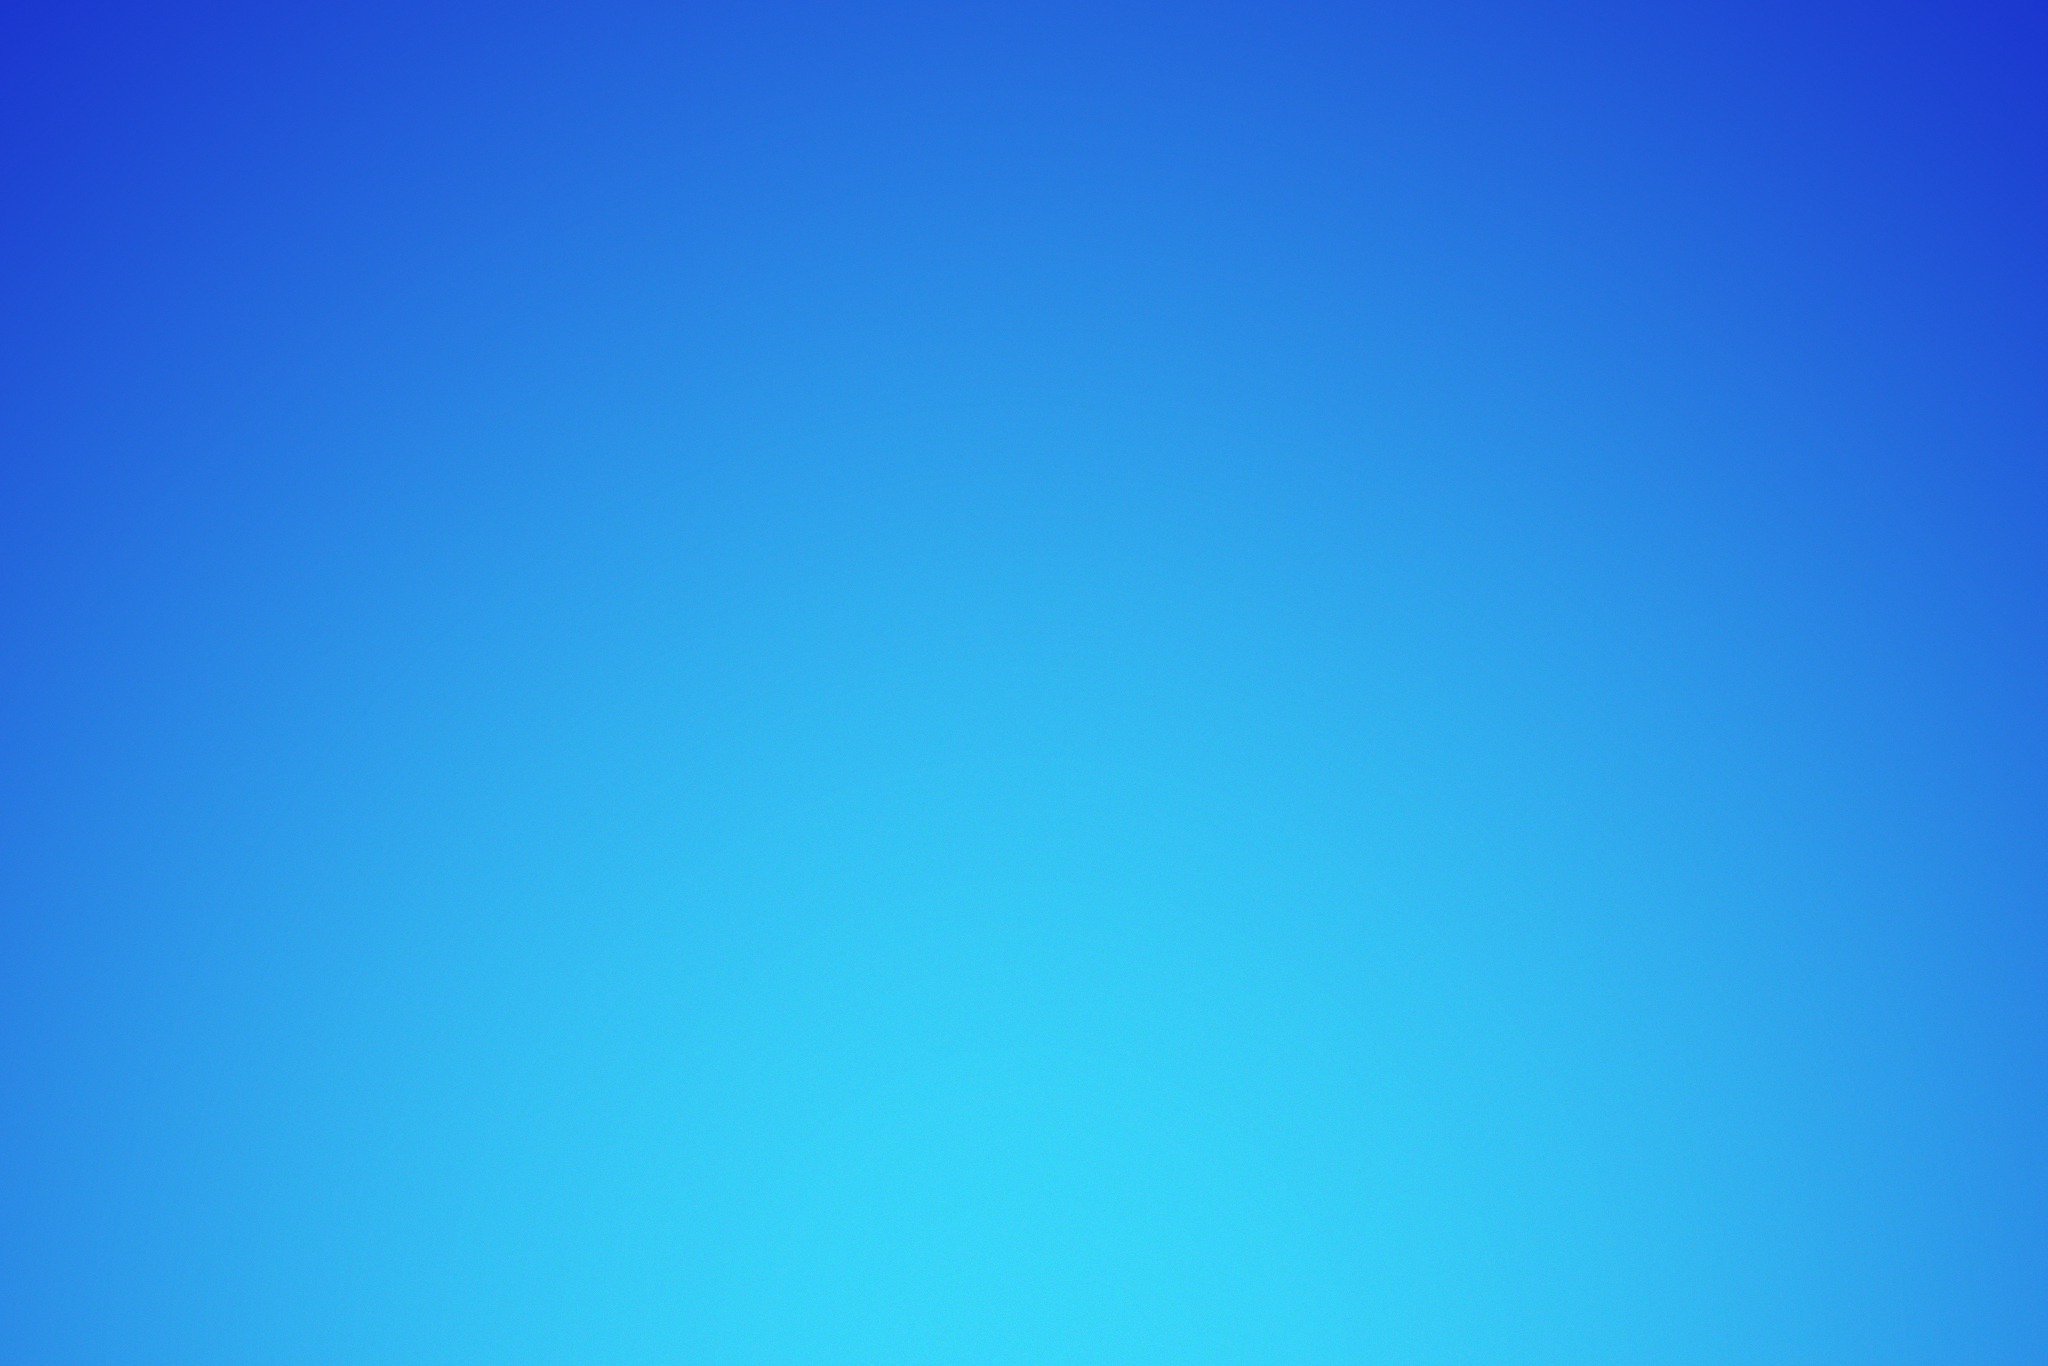 a blue radial gradient background transitioning from light to dark blue